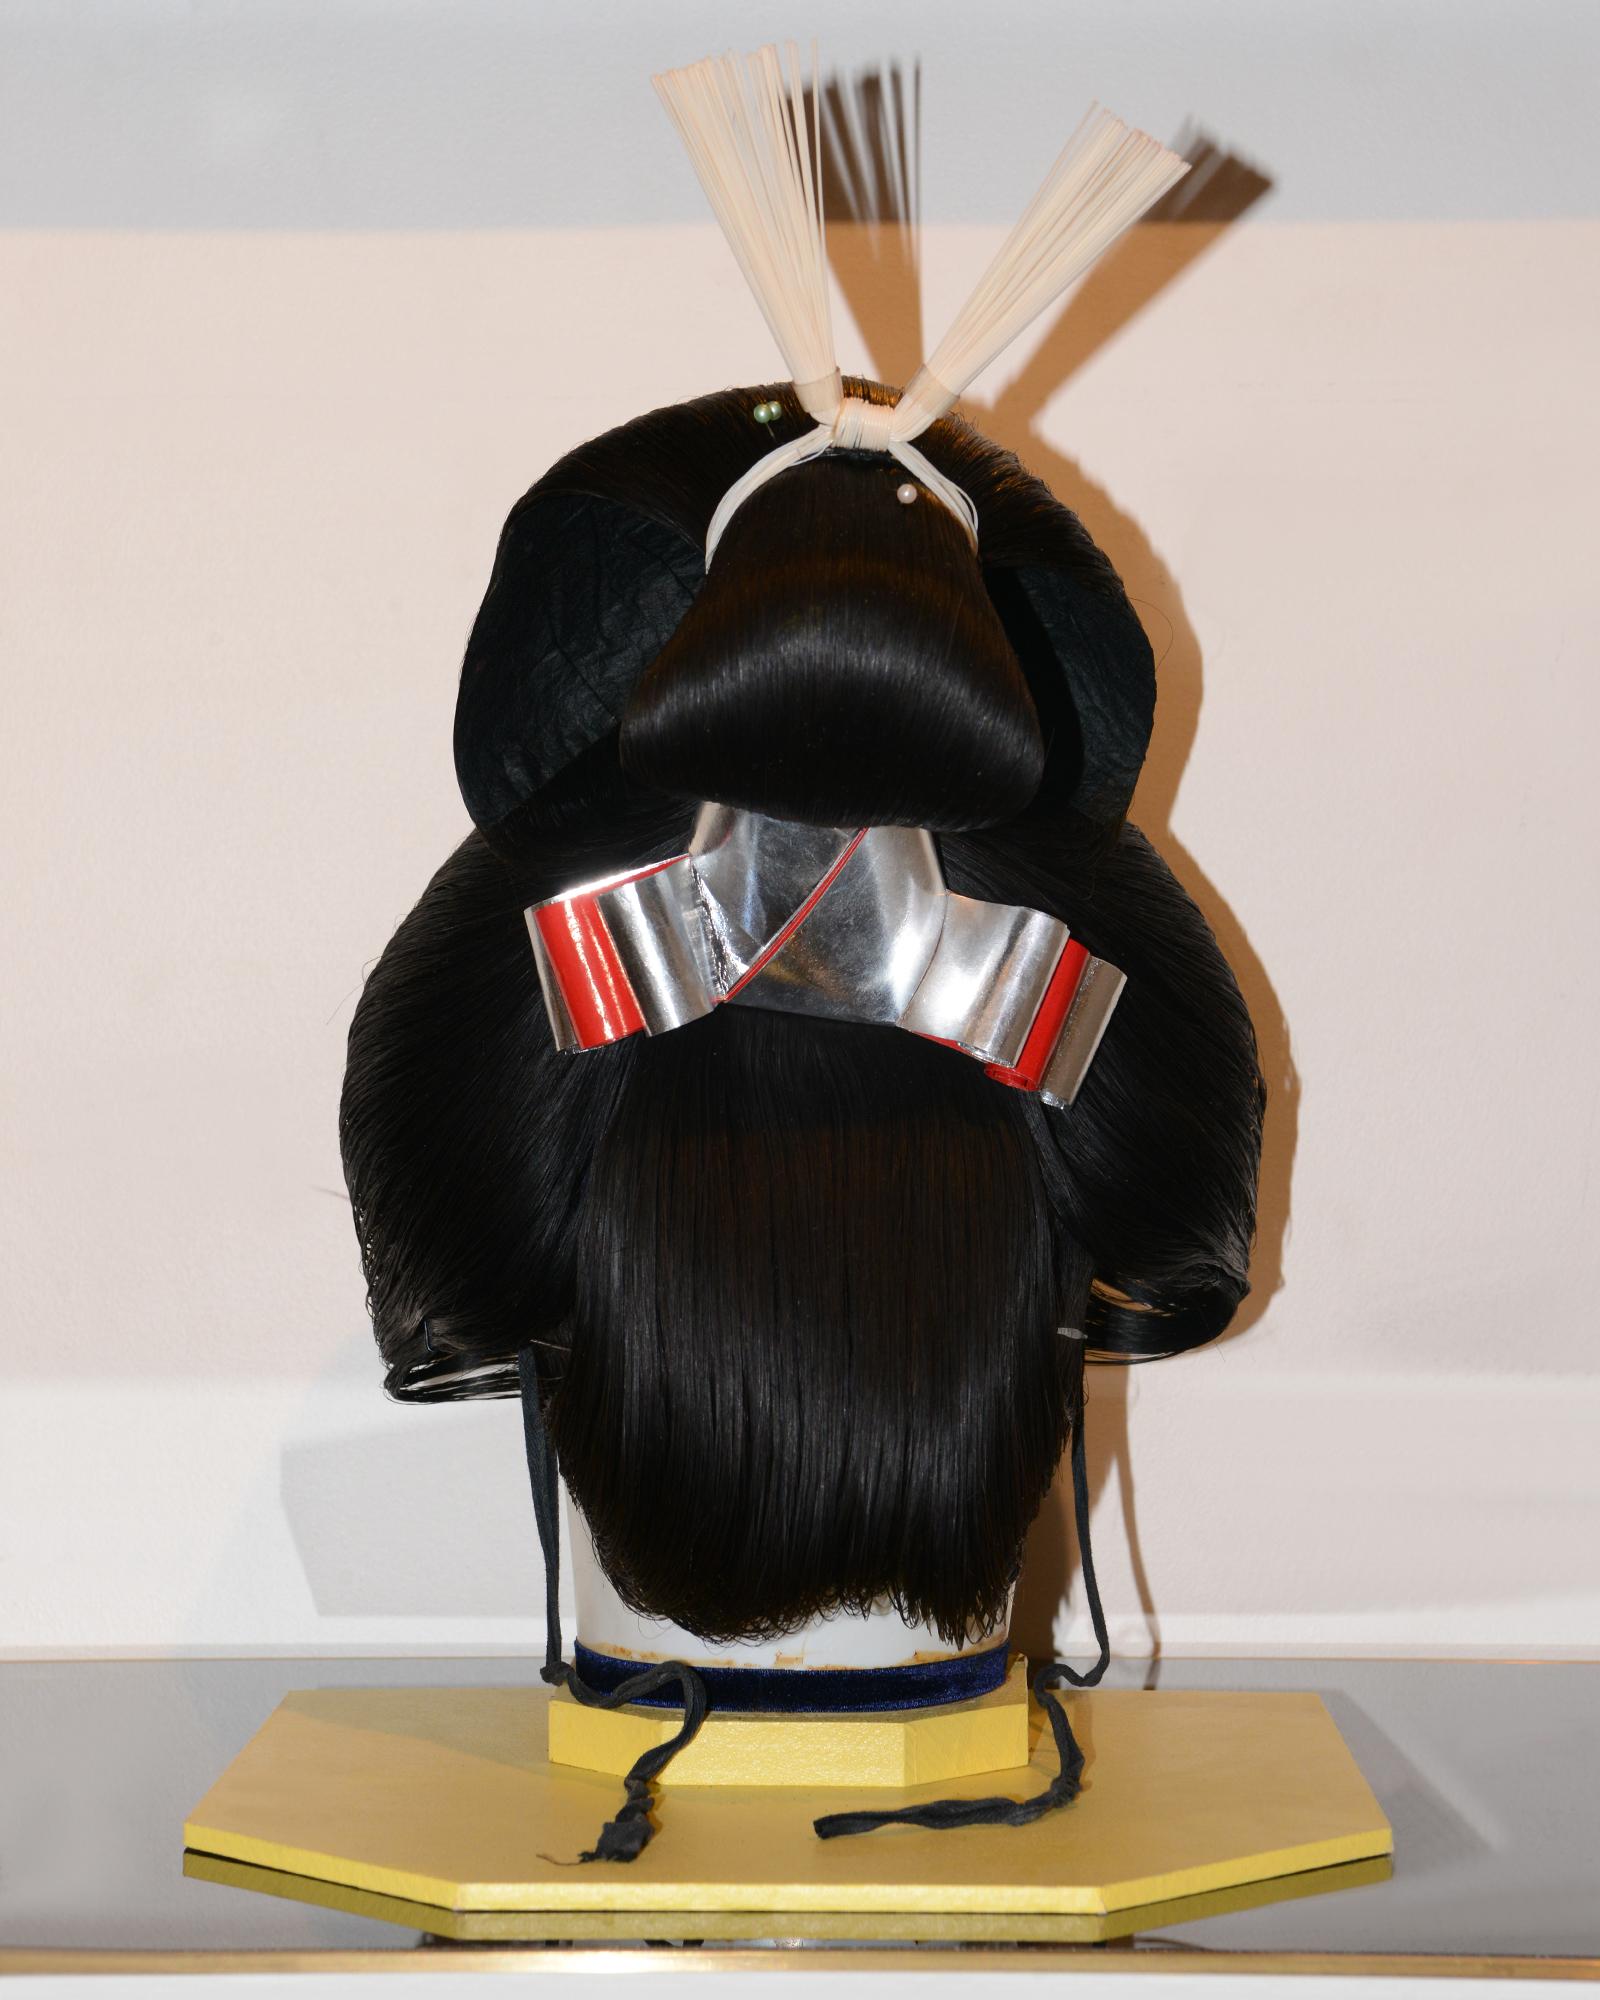 Hand-Crafted Geisha Wig & Nô Theater 2 Mask For Sale